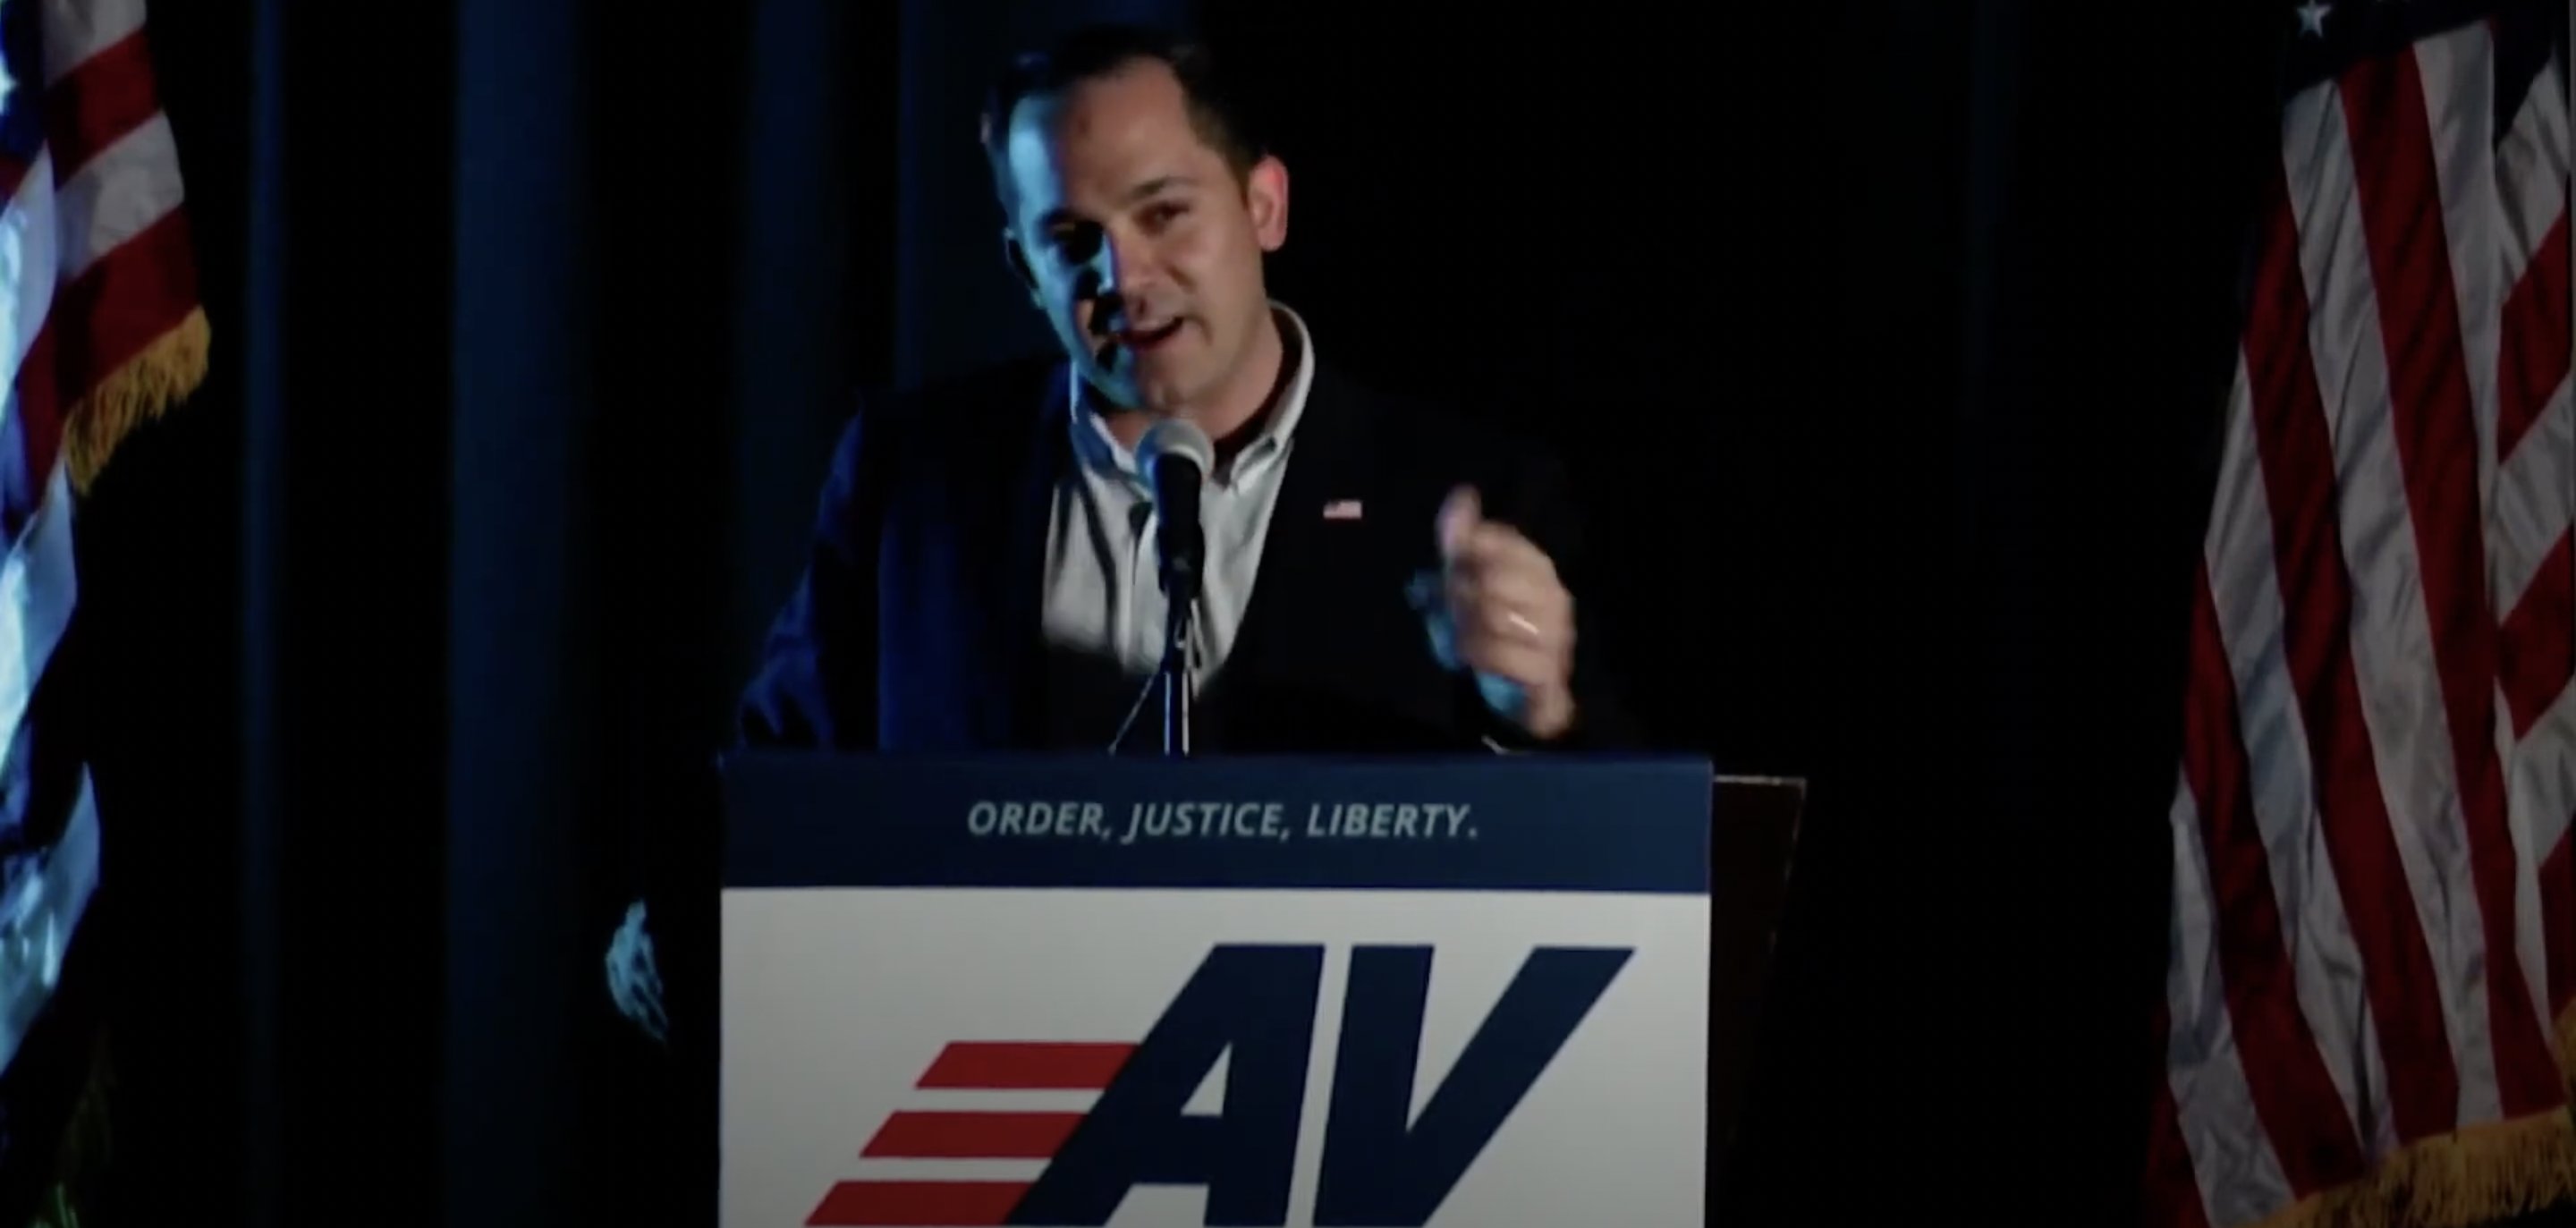 A man in blue suit standing at a podium with the letters AV on it speaking into a mic with two American flags behind him.